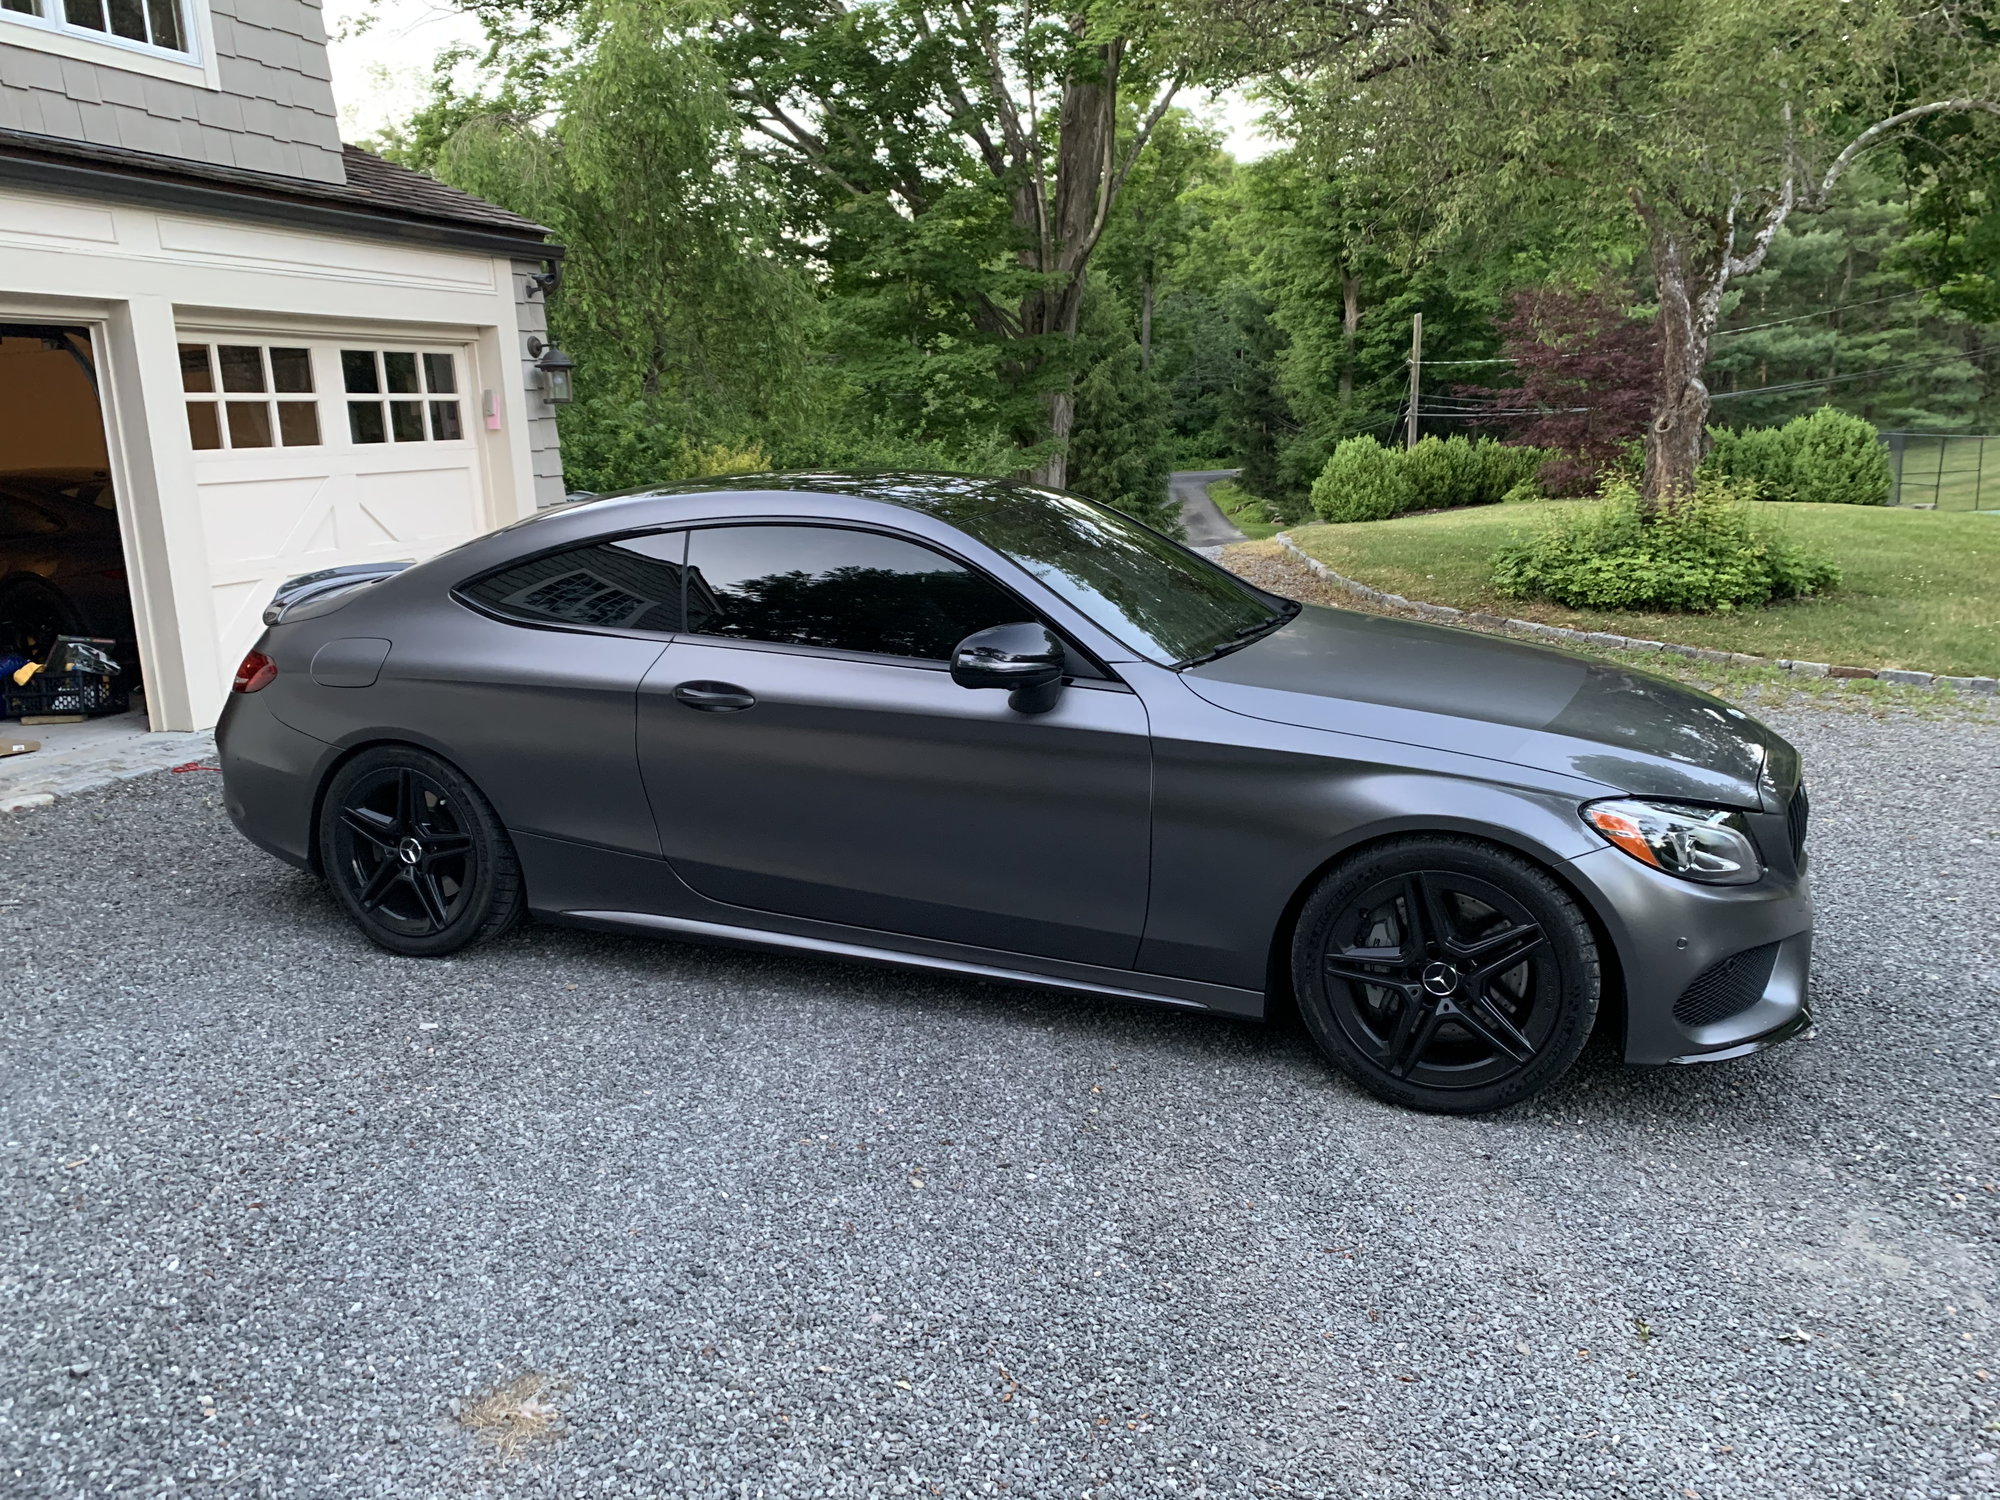 2017 Mercedes-Benz C43 AMG - 2017 C43 AMG, Wrapped in Satin Dark Gray, and the perfect mods! - Used - VIN WDDWJ6EB3HF464130 - 73,000 Miles - 6 cyl - AWD - Automatic - Coupe - Other - Bedford, NY 10506, United States